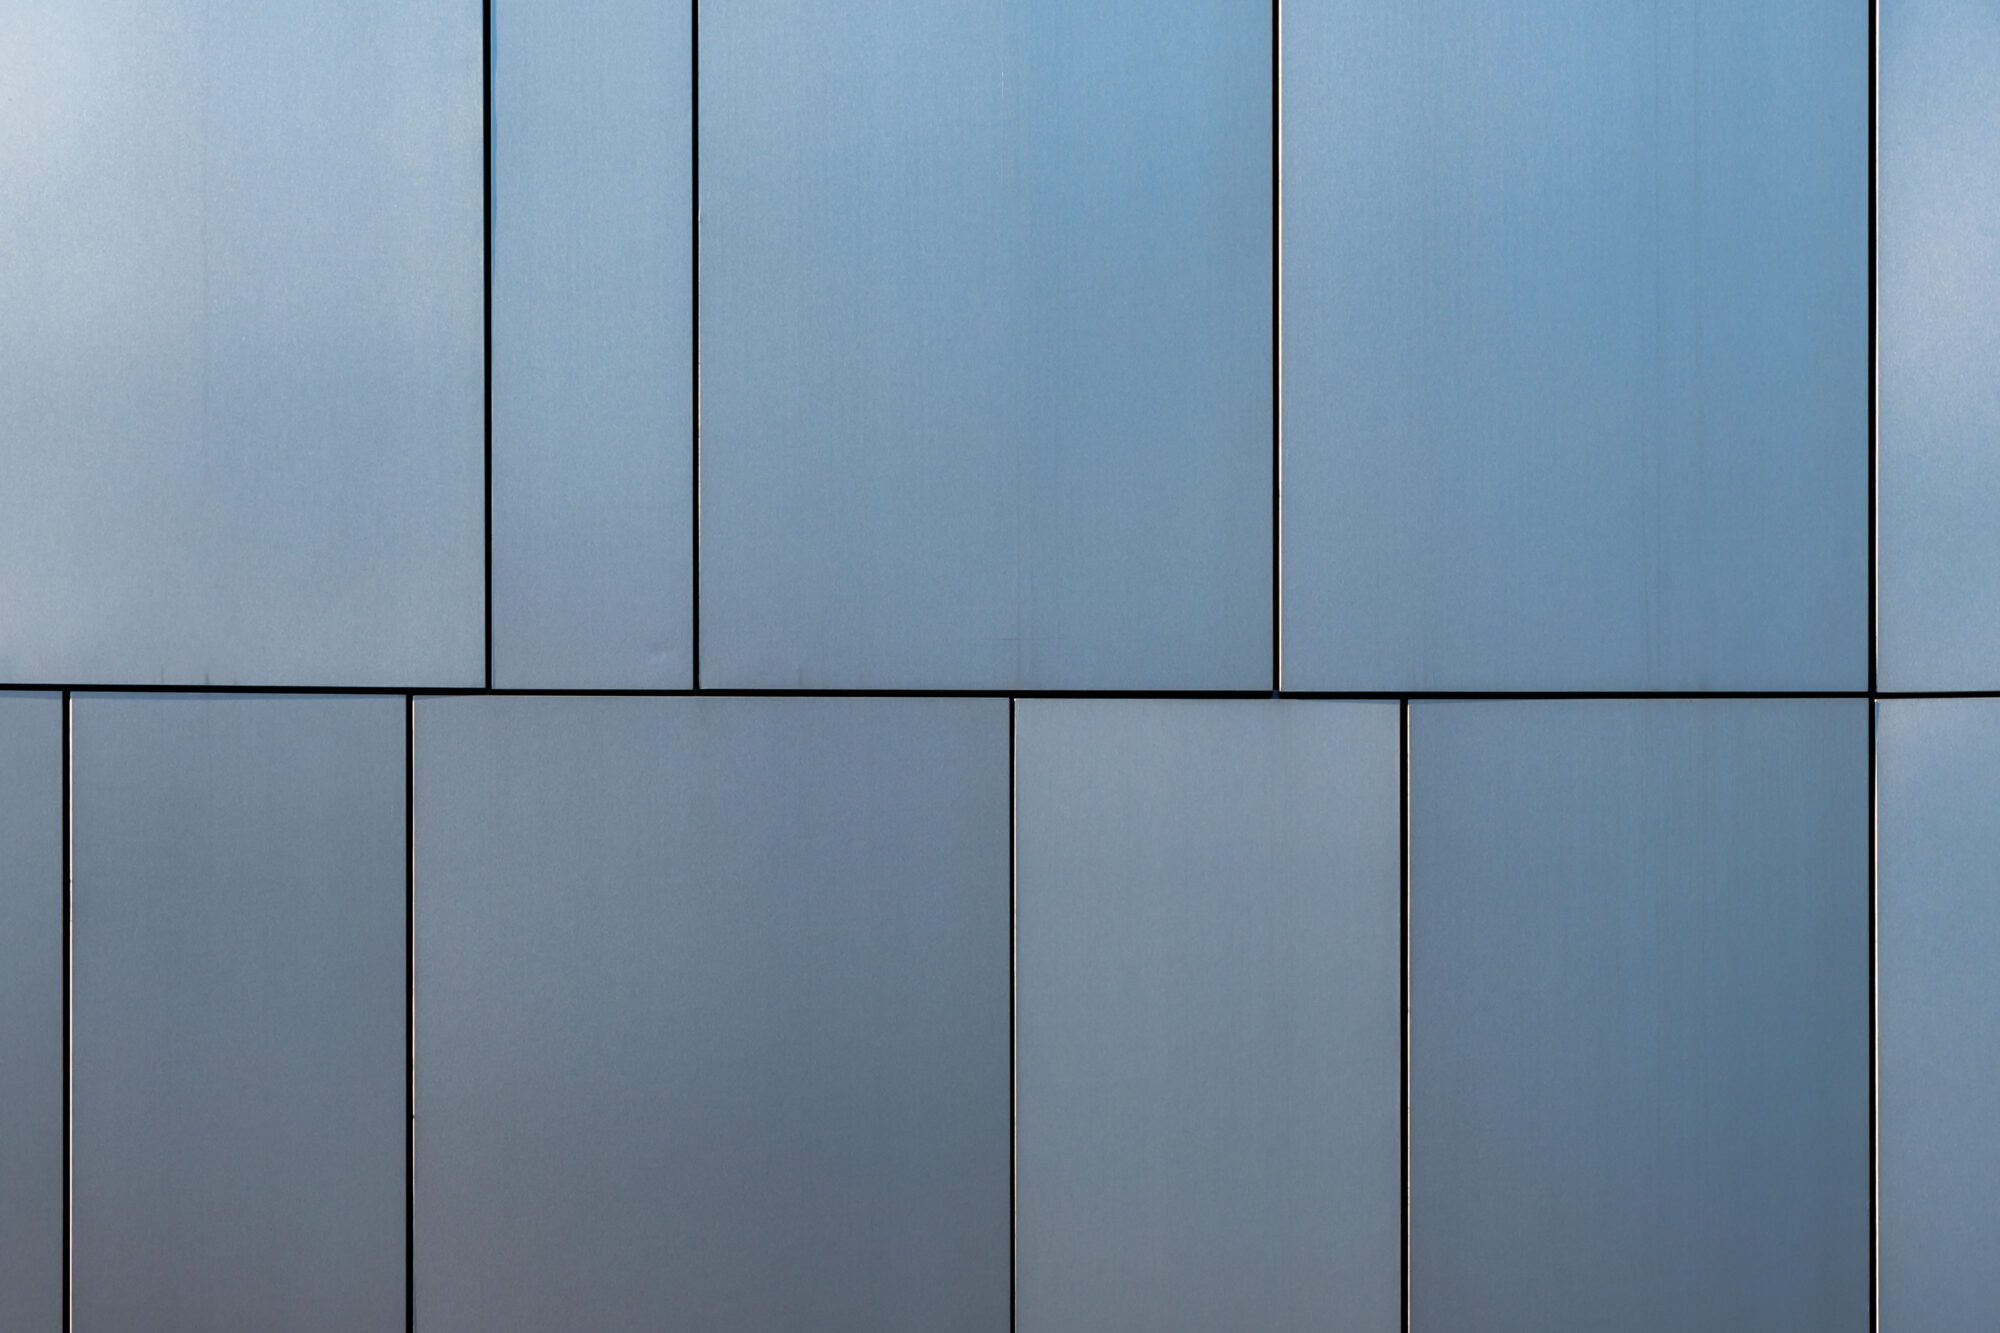 Stainless steel facade cladding shining in different grey and blue tones building elements